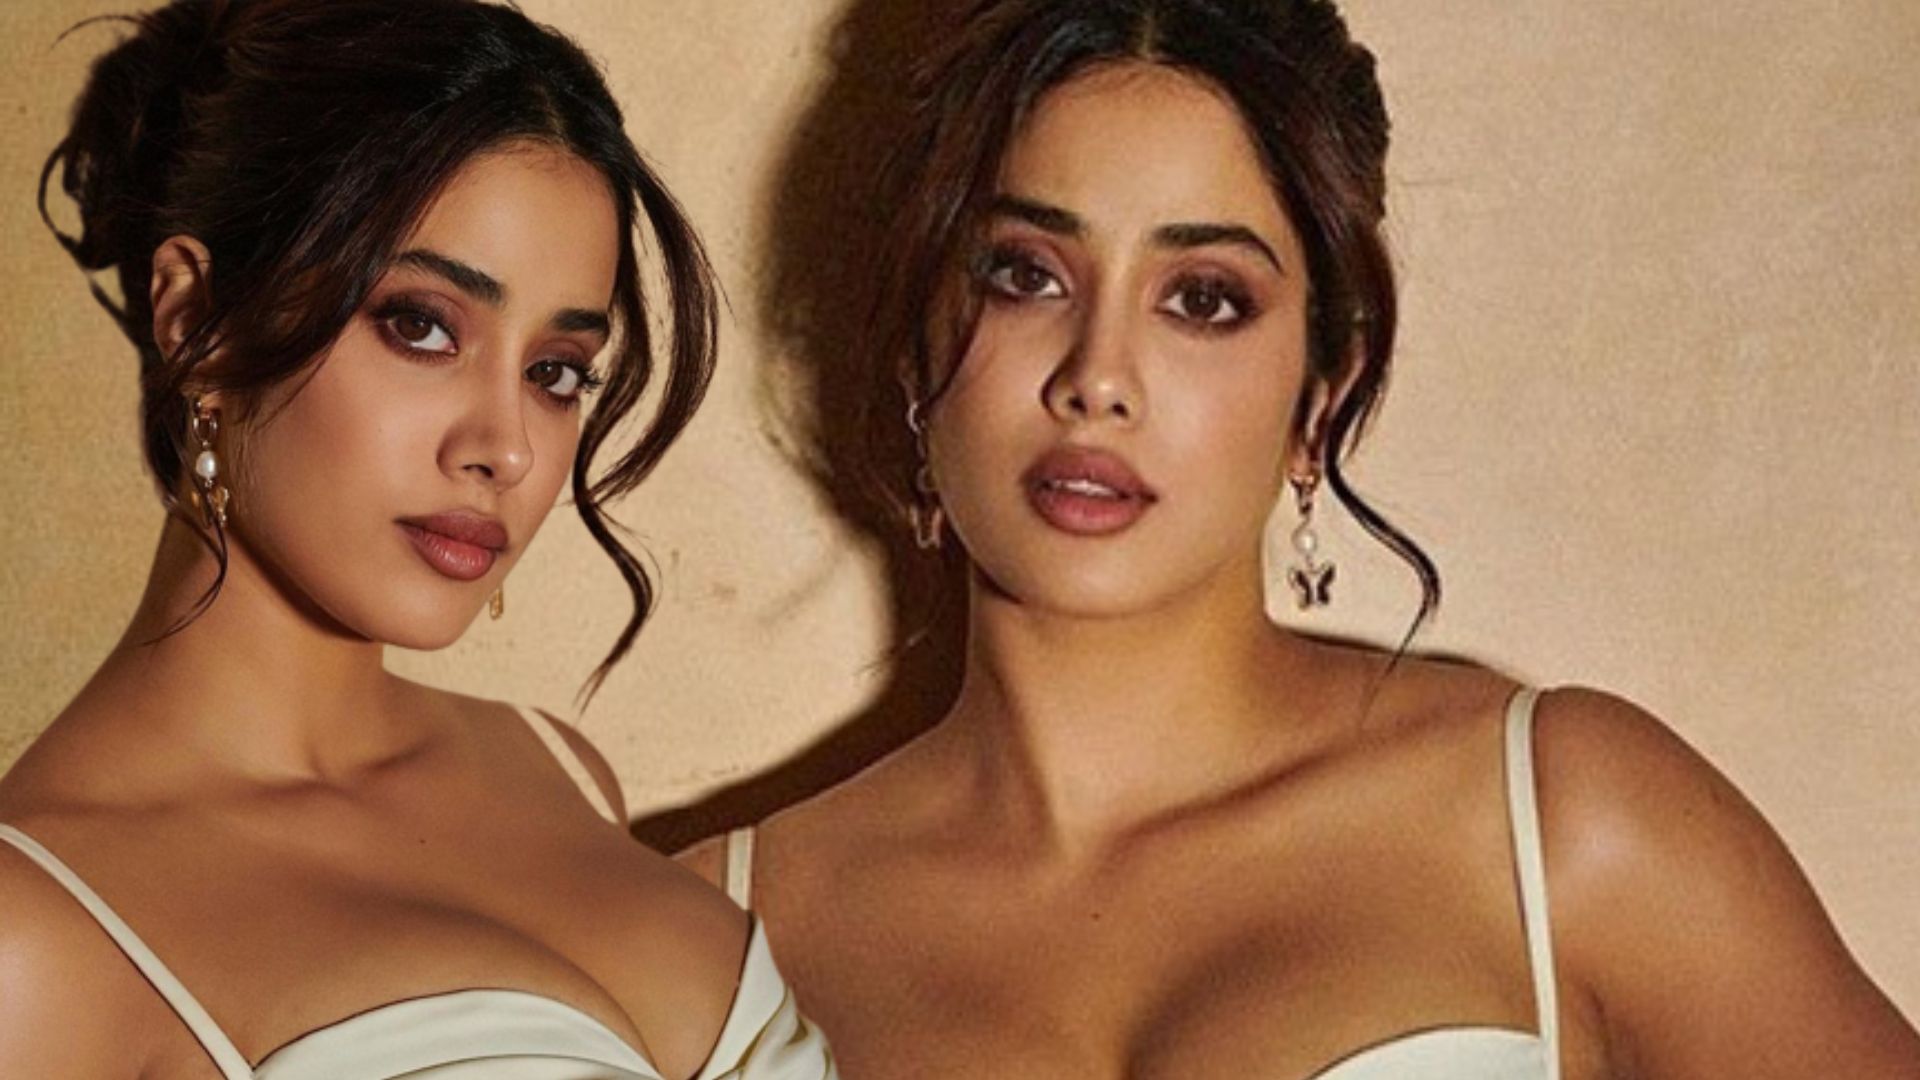 My dad's gonna kill me' for chic haircut: Janhvi Kapoor - The Statesman